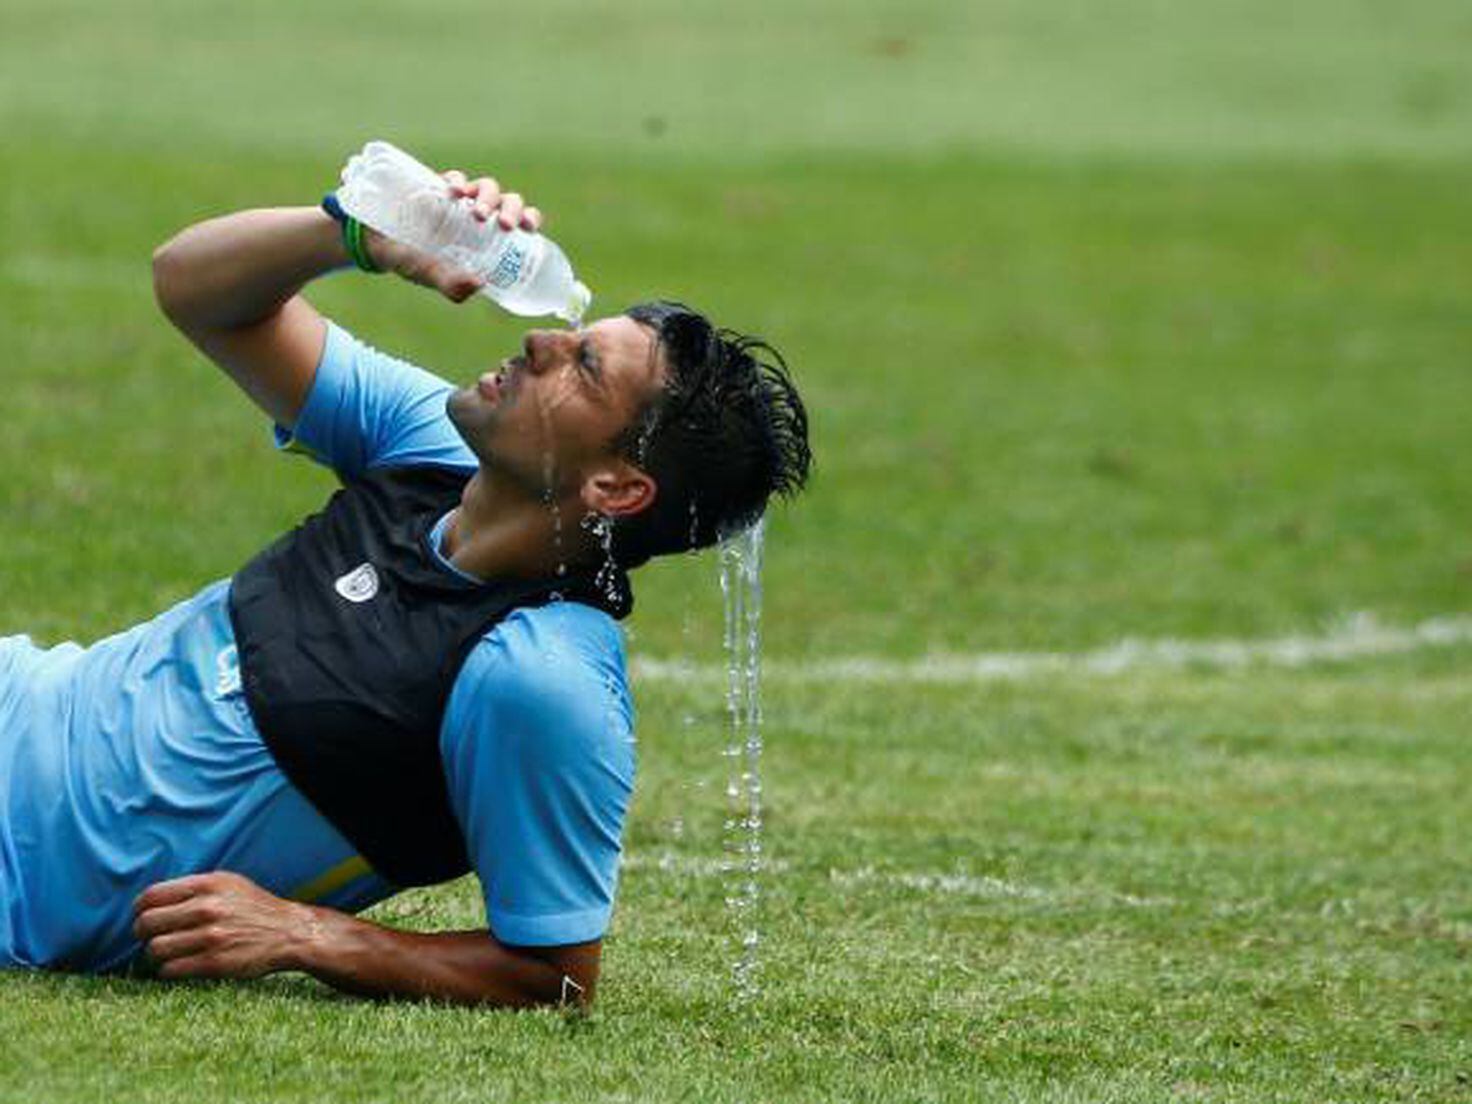 Water break! Your World Cup burning questions answered